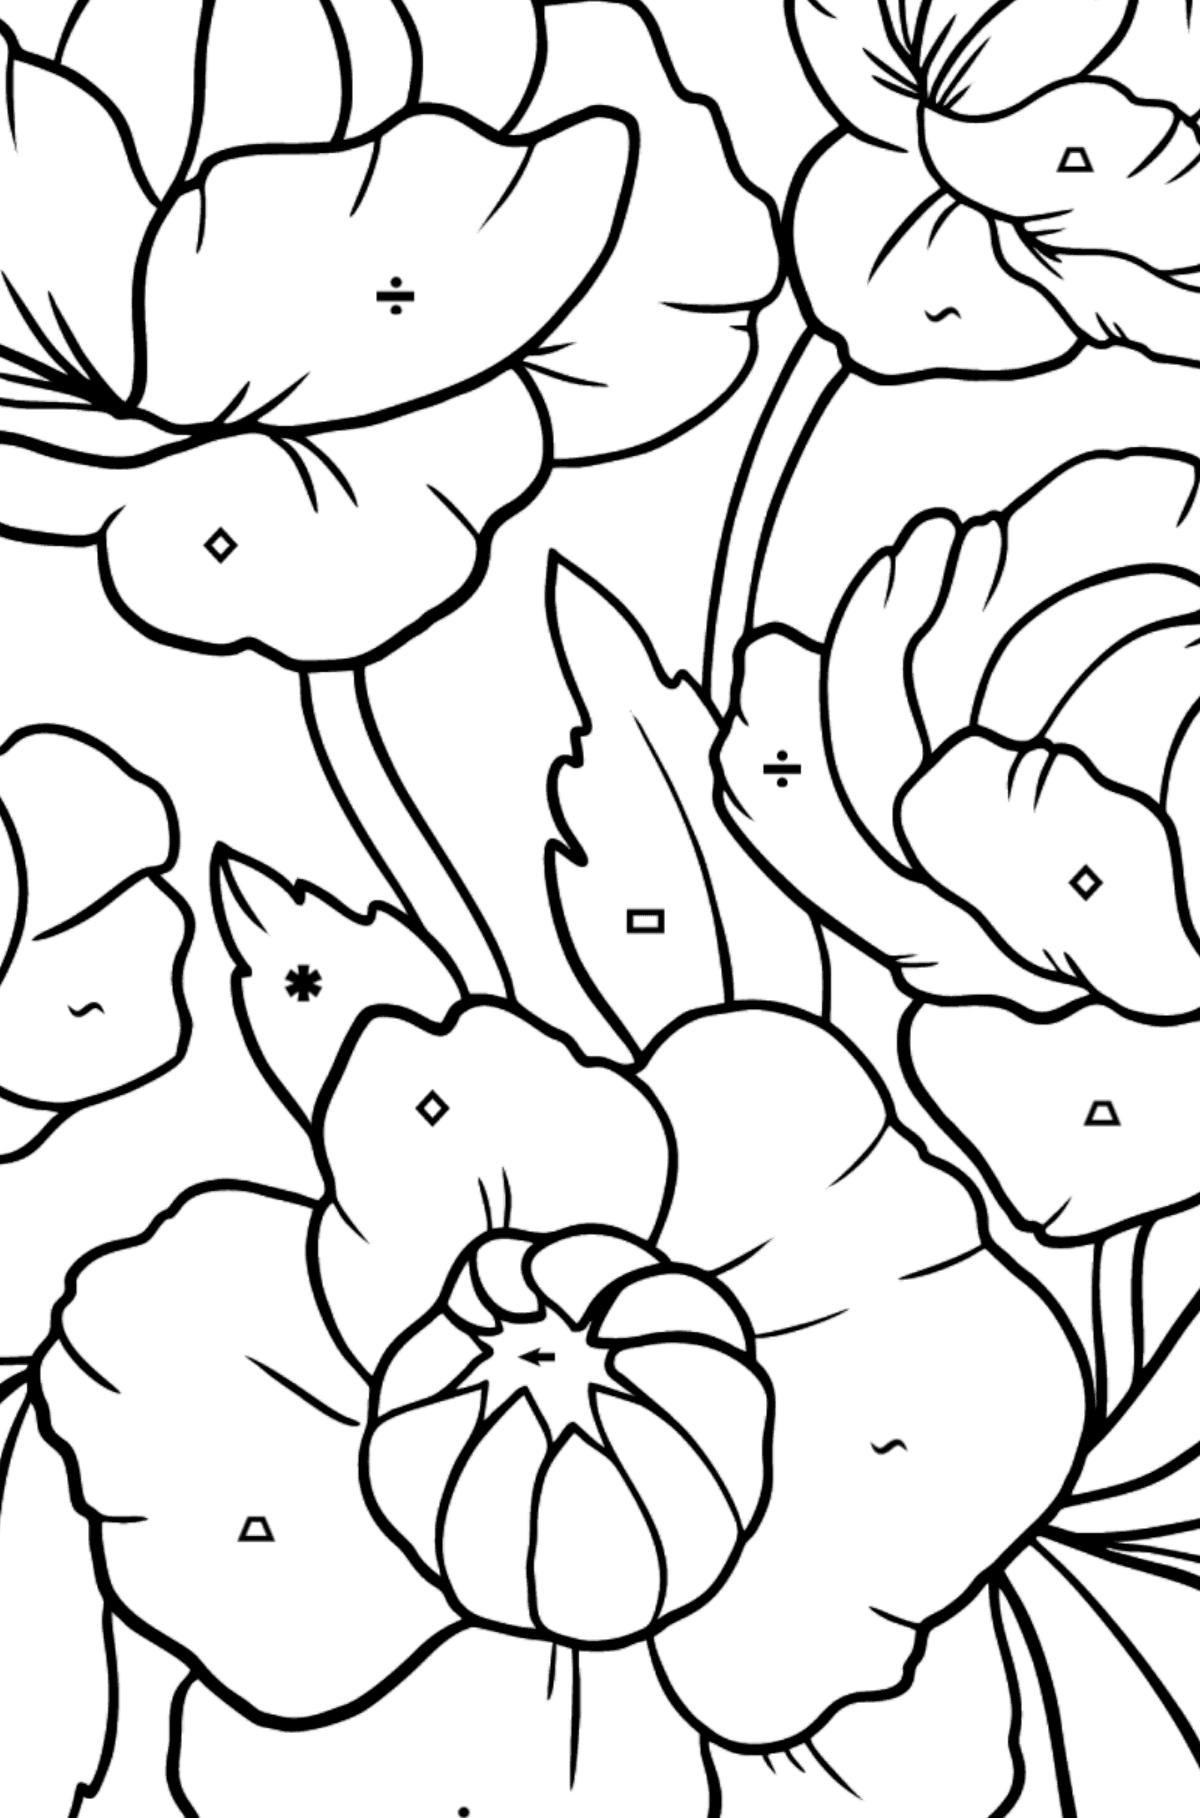 Flower Coloring Page - A Pink Globeflower - Coloring by Symbols and Geometric Shapes for Kids